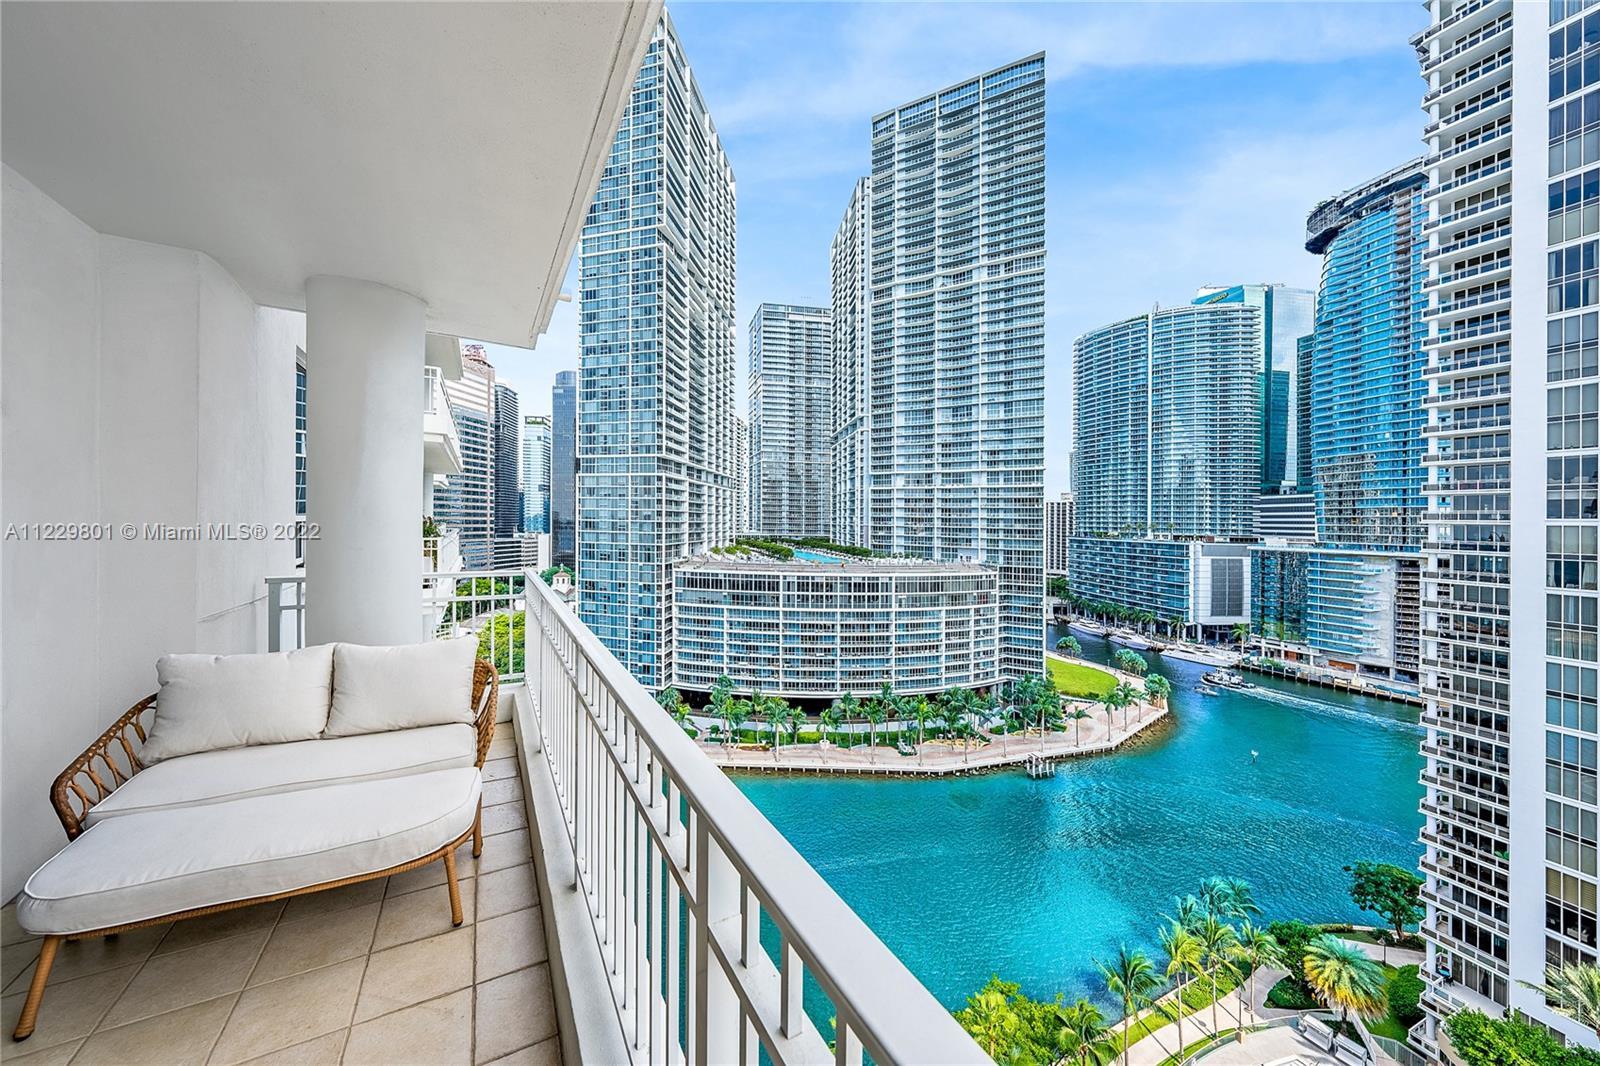 Beautiful 1 bedroom, 1.5 bath in the prestigious Courts, one of the best buildings of Brickell Key. 